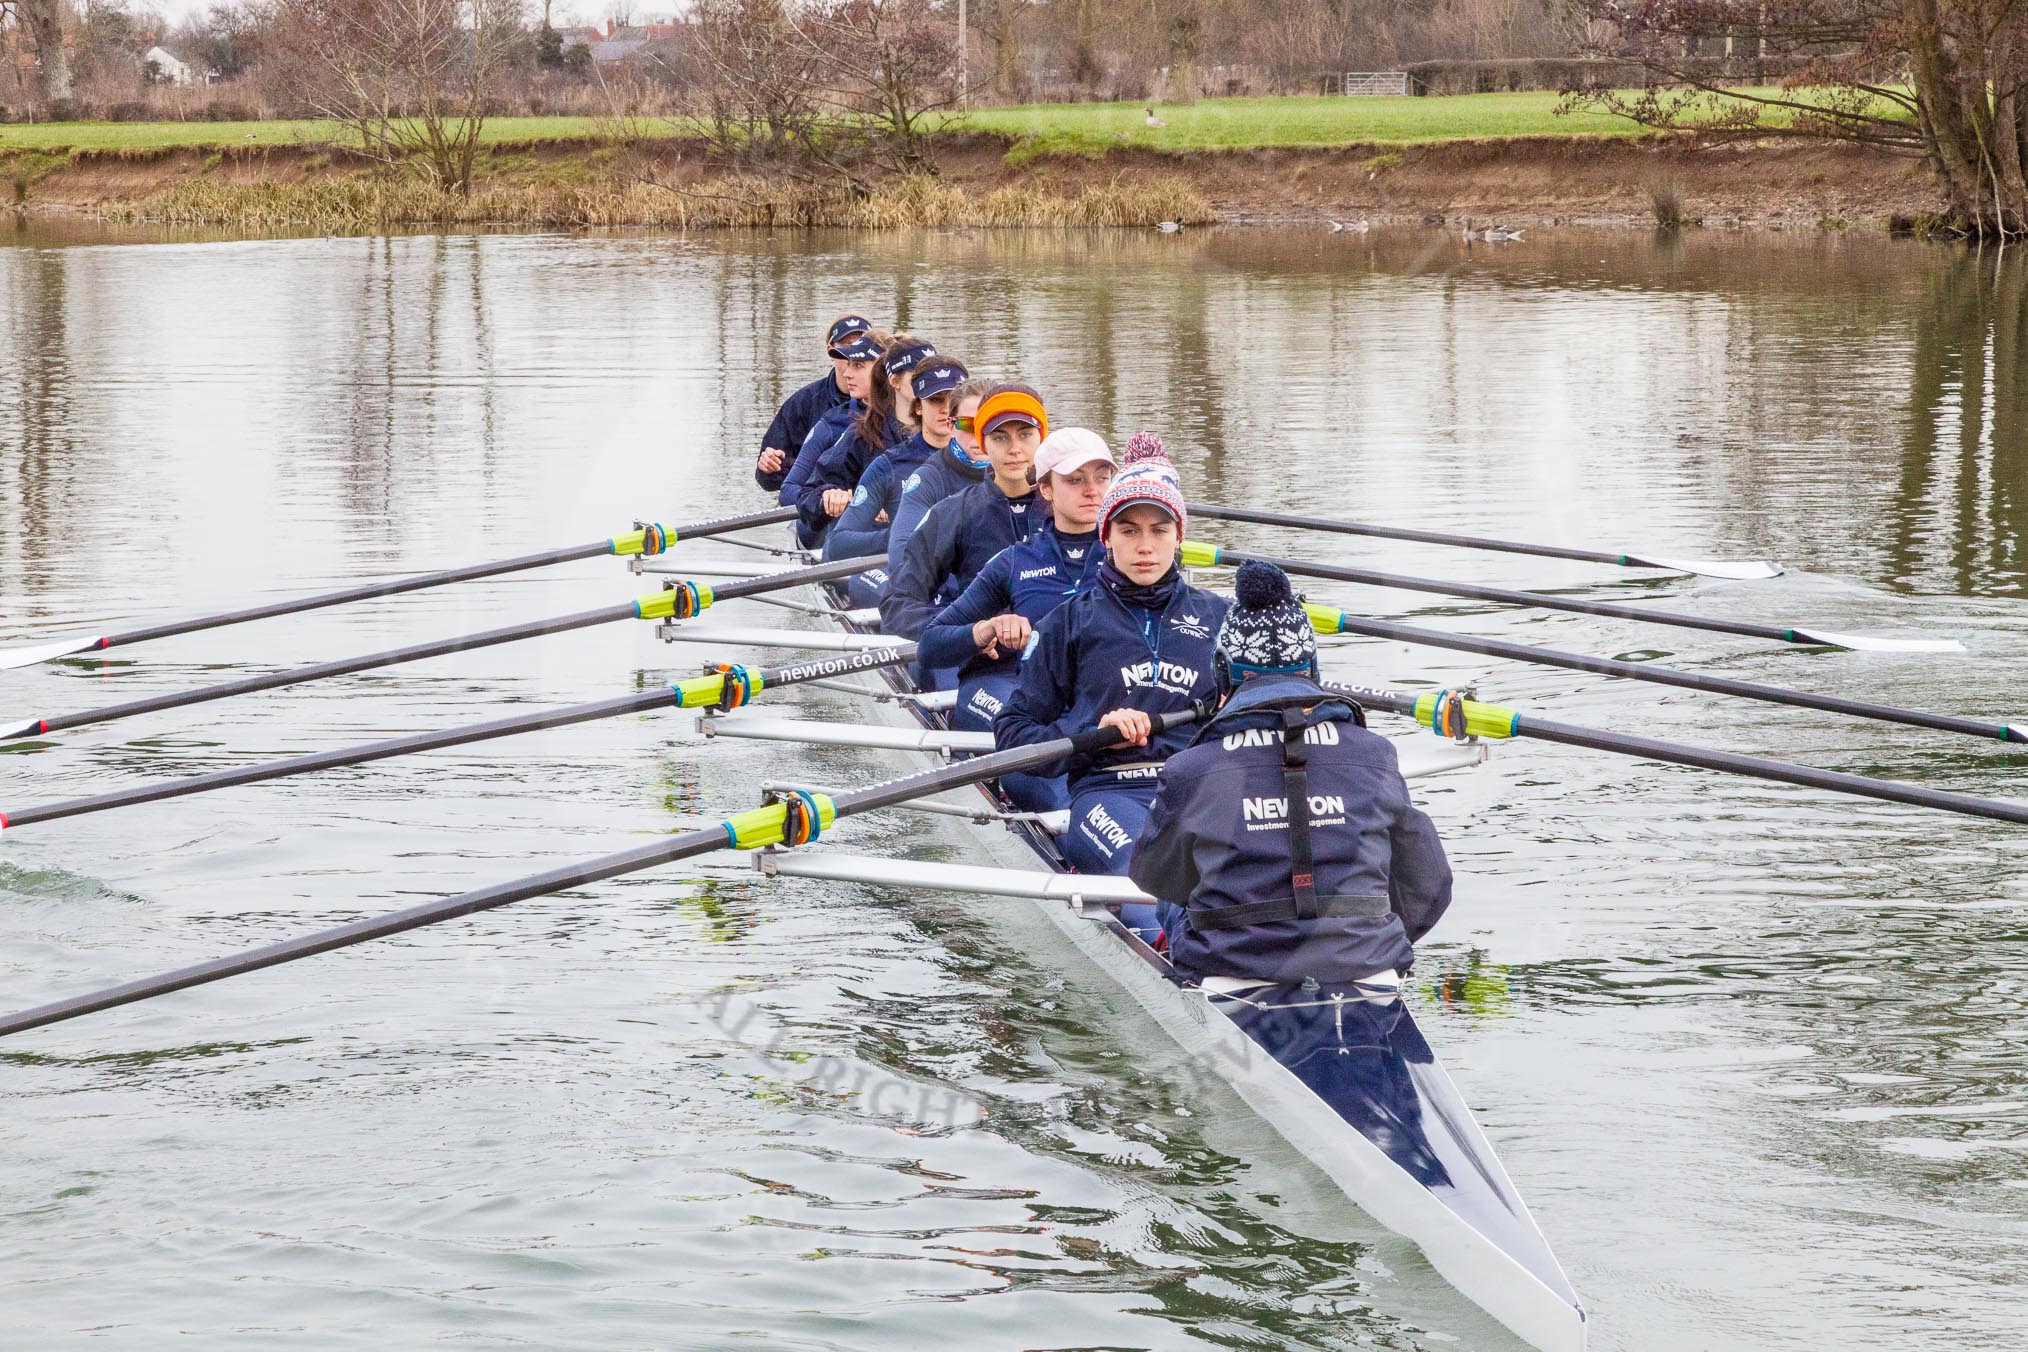 The Boat Race season 2016 - OUWBC training Wallingford: Osiris, the OUWBC reserve boat, with (from bow) Georgie Daniell, Issy Dodds, Chloe Farrar, Elettra Ardissino, Isa Von Loga, Rebecca Te Water Naude, Kate Erickson, Flo Pickles and cox Will Smith.
River Thames,
Wallingford,
Oxfordshire,

on 29 February 2016 at 15:20, image #44